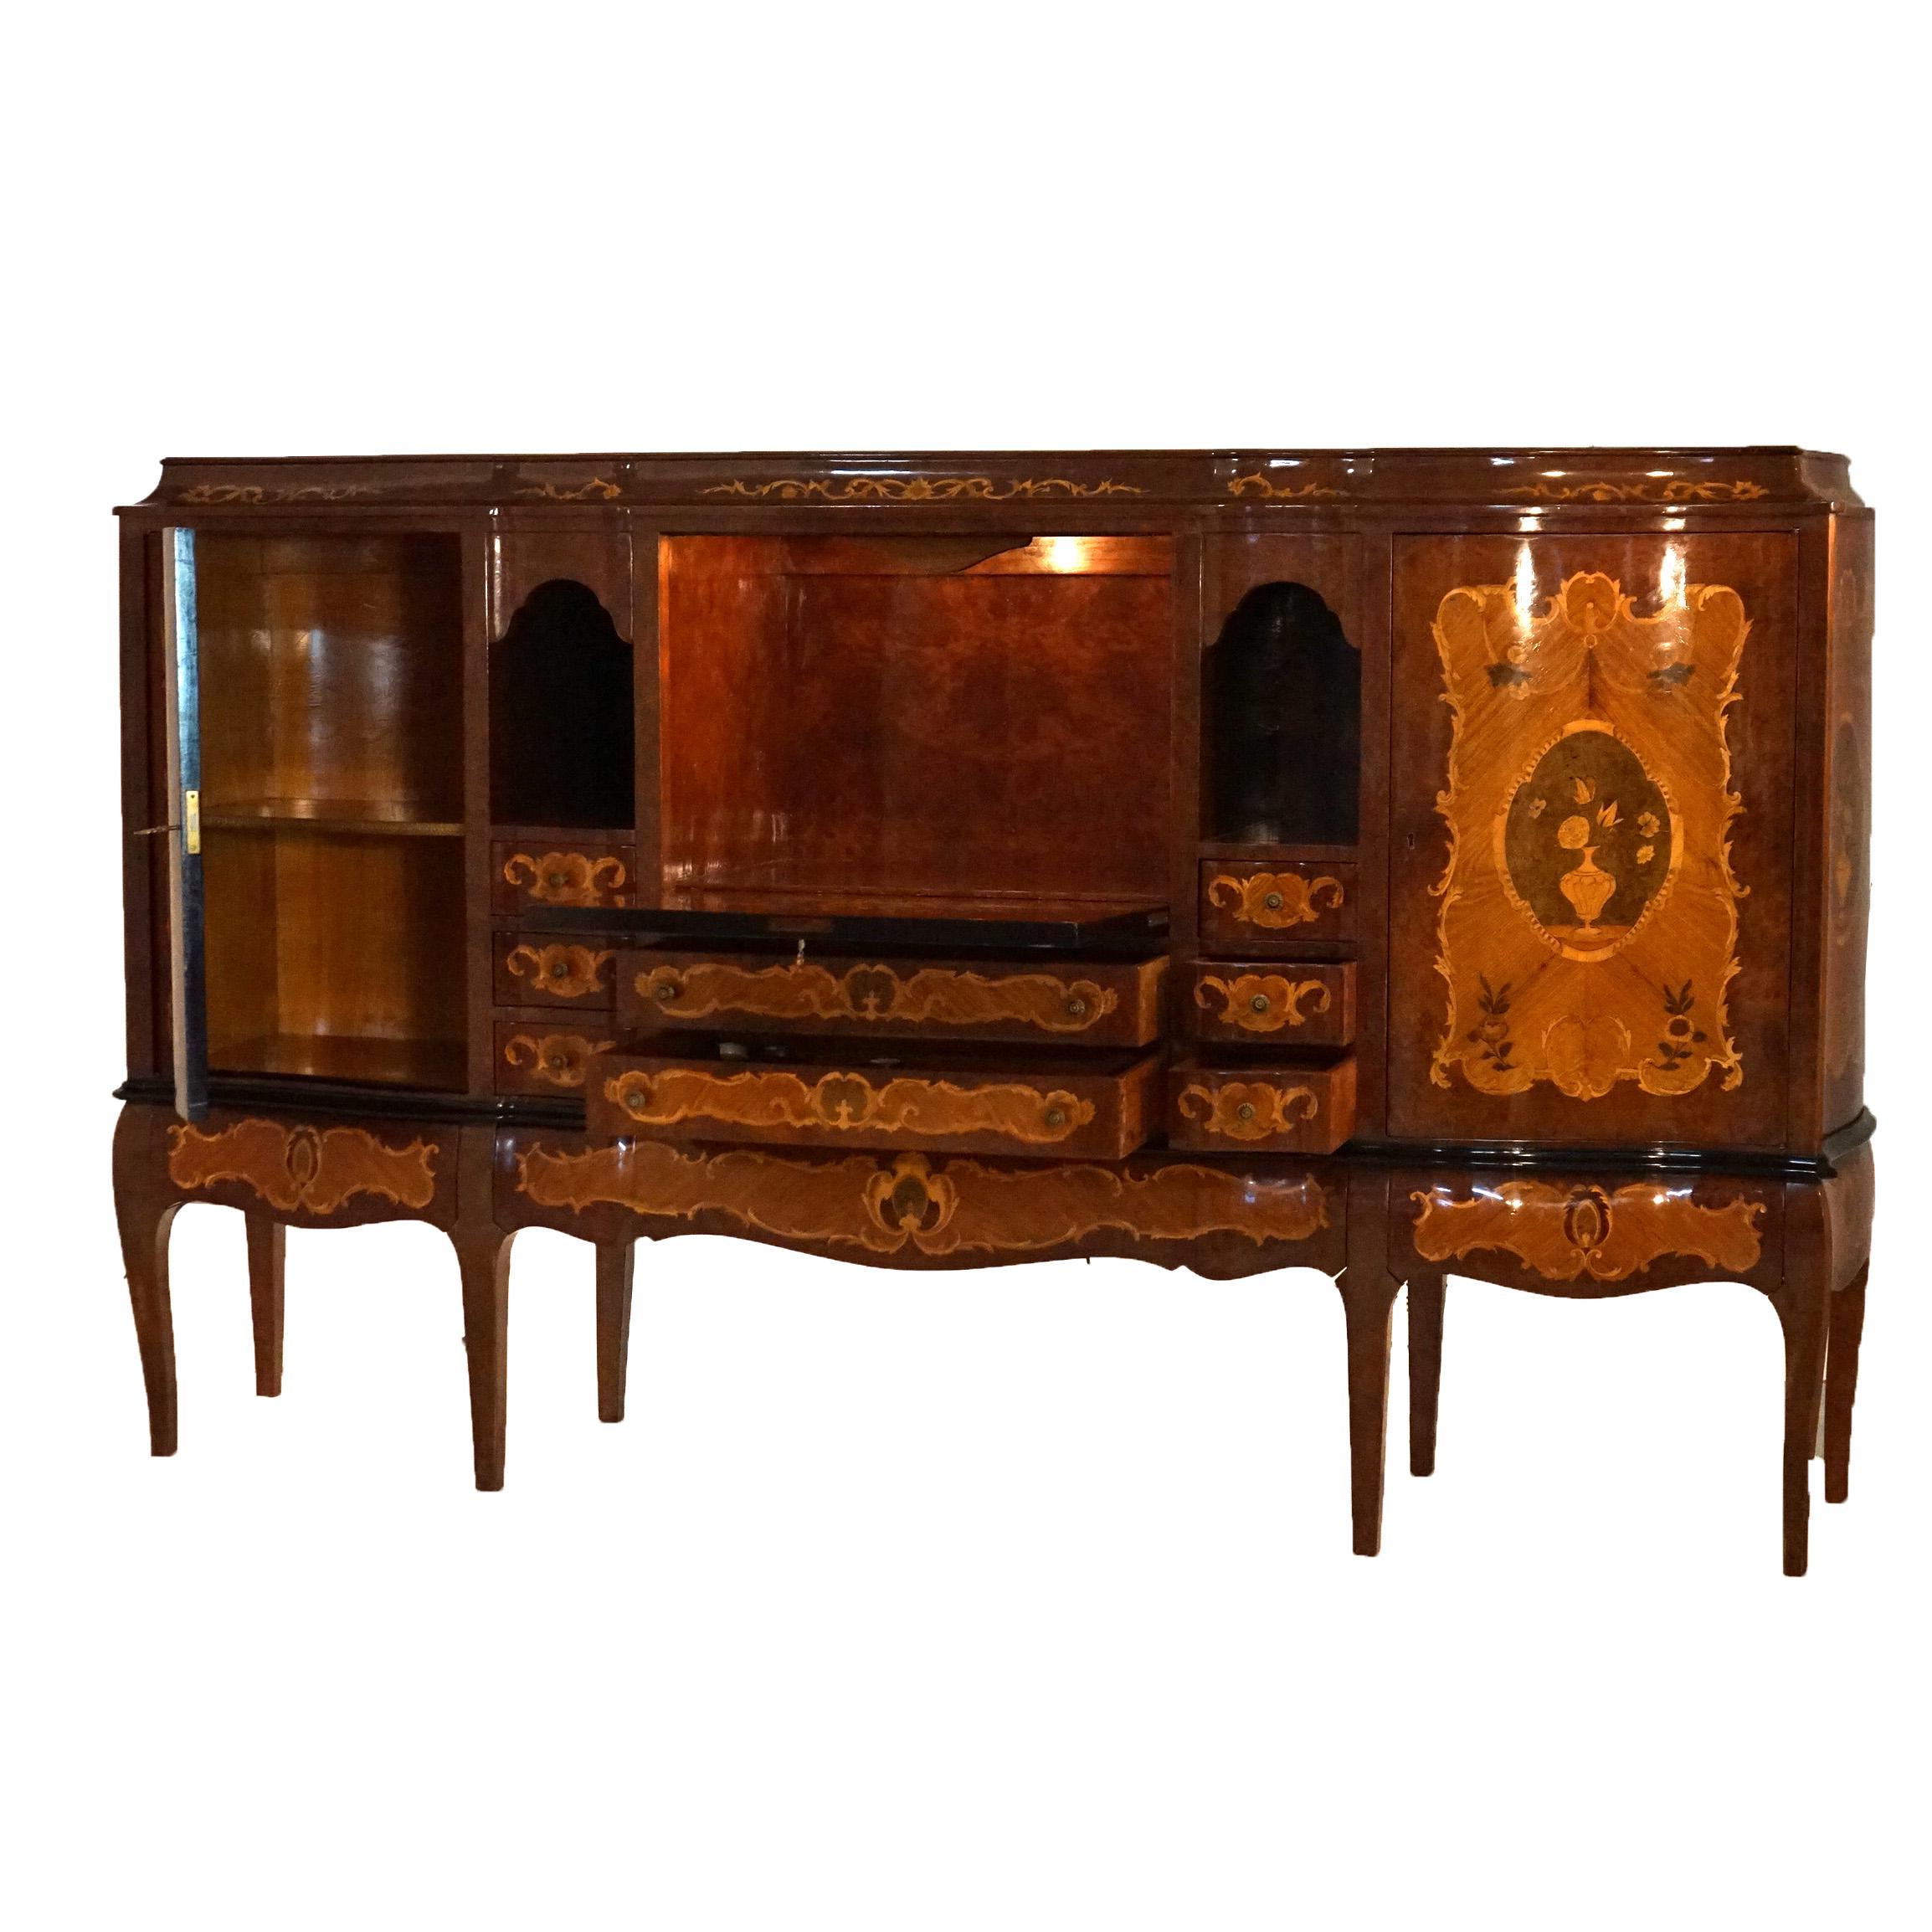 Inlay Antique French Kingwood Satinwood & Burlwood Marquetry Inlaid Sideboard C1930 For Sale